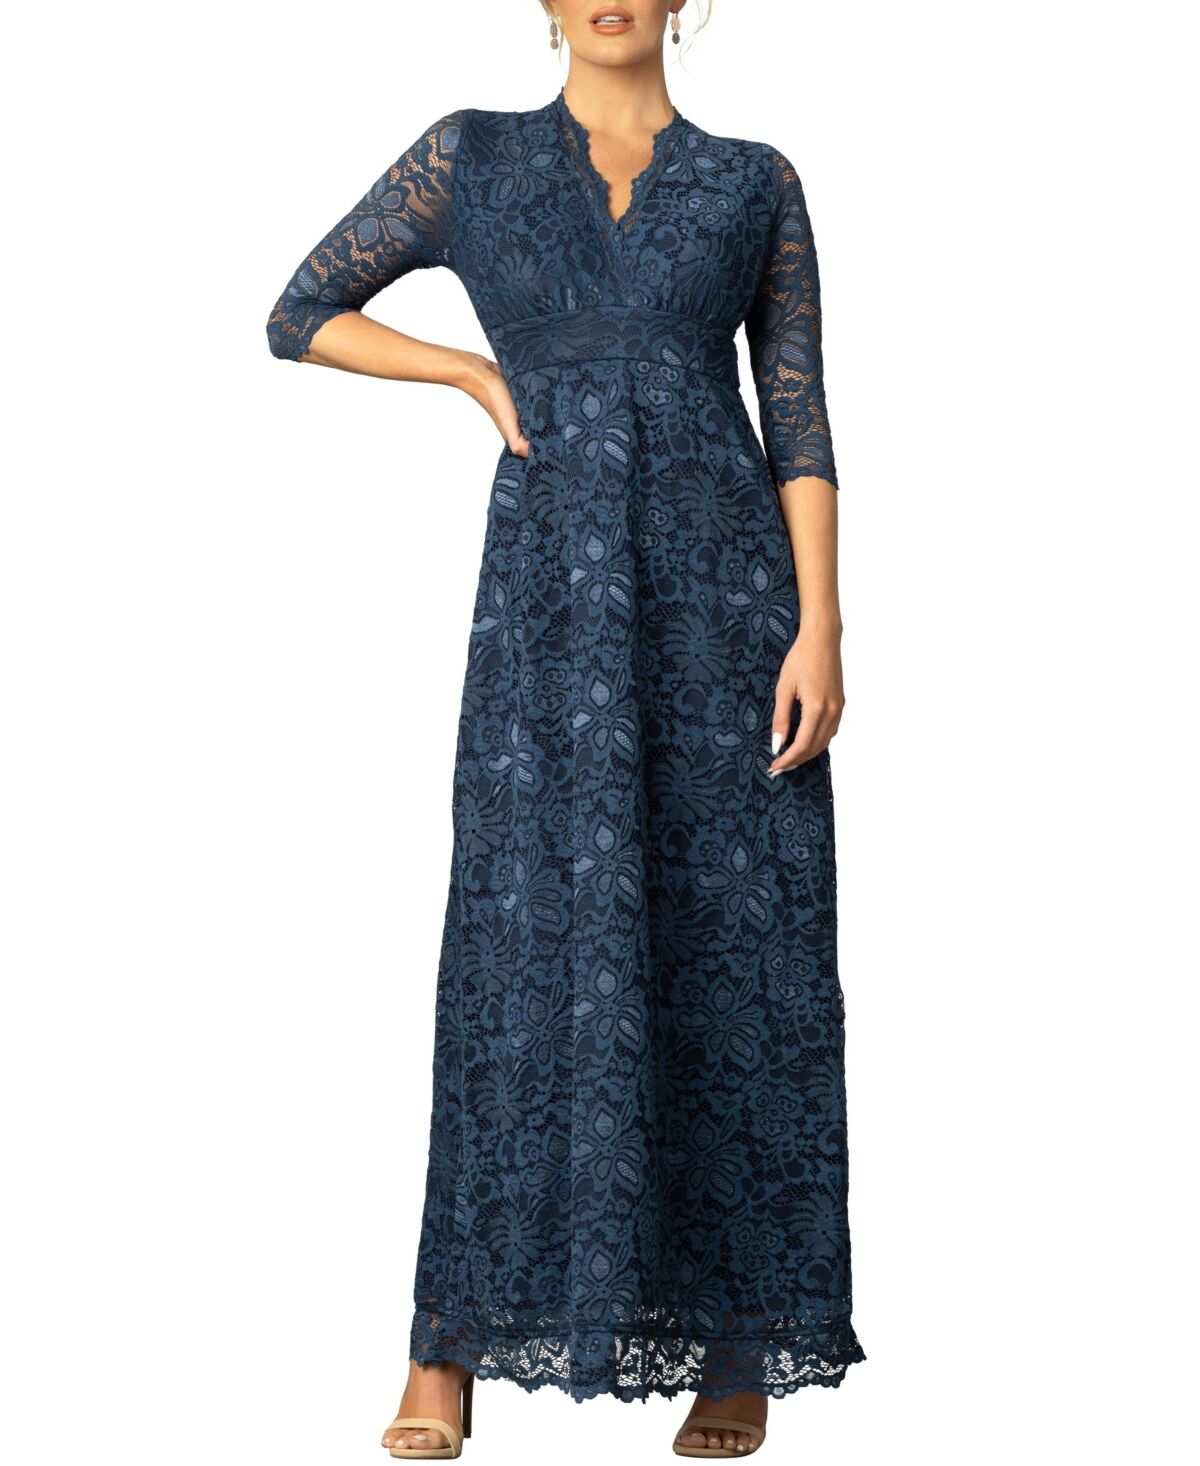 Kiyonna Women's Maria Lace A-Line Evening Gown with Pockets - Nocturnal navy